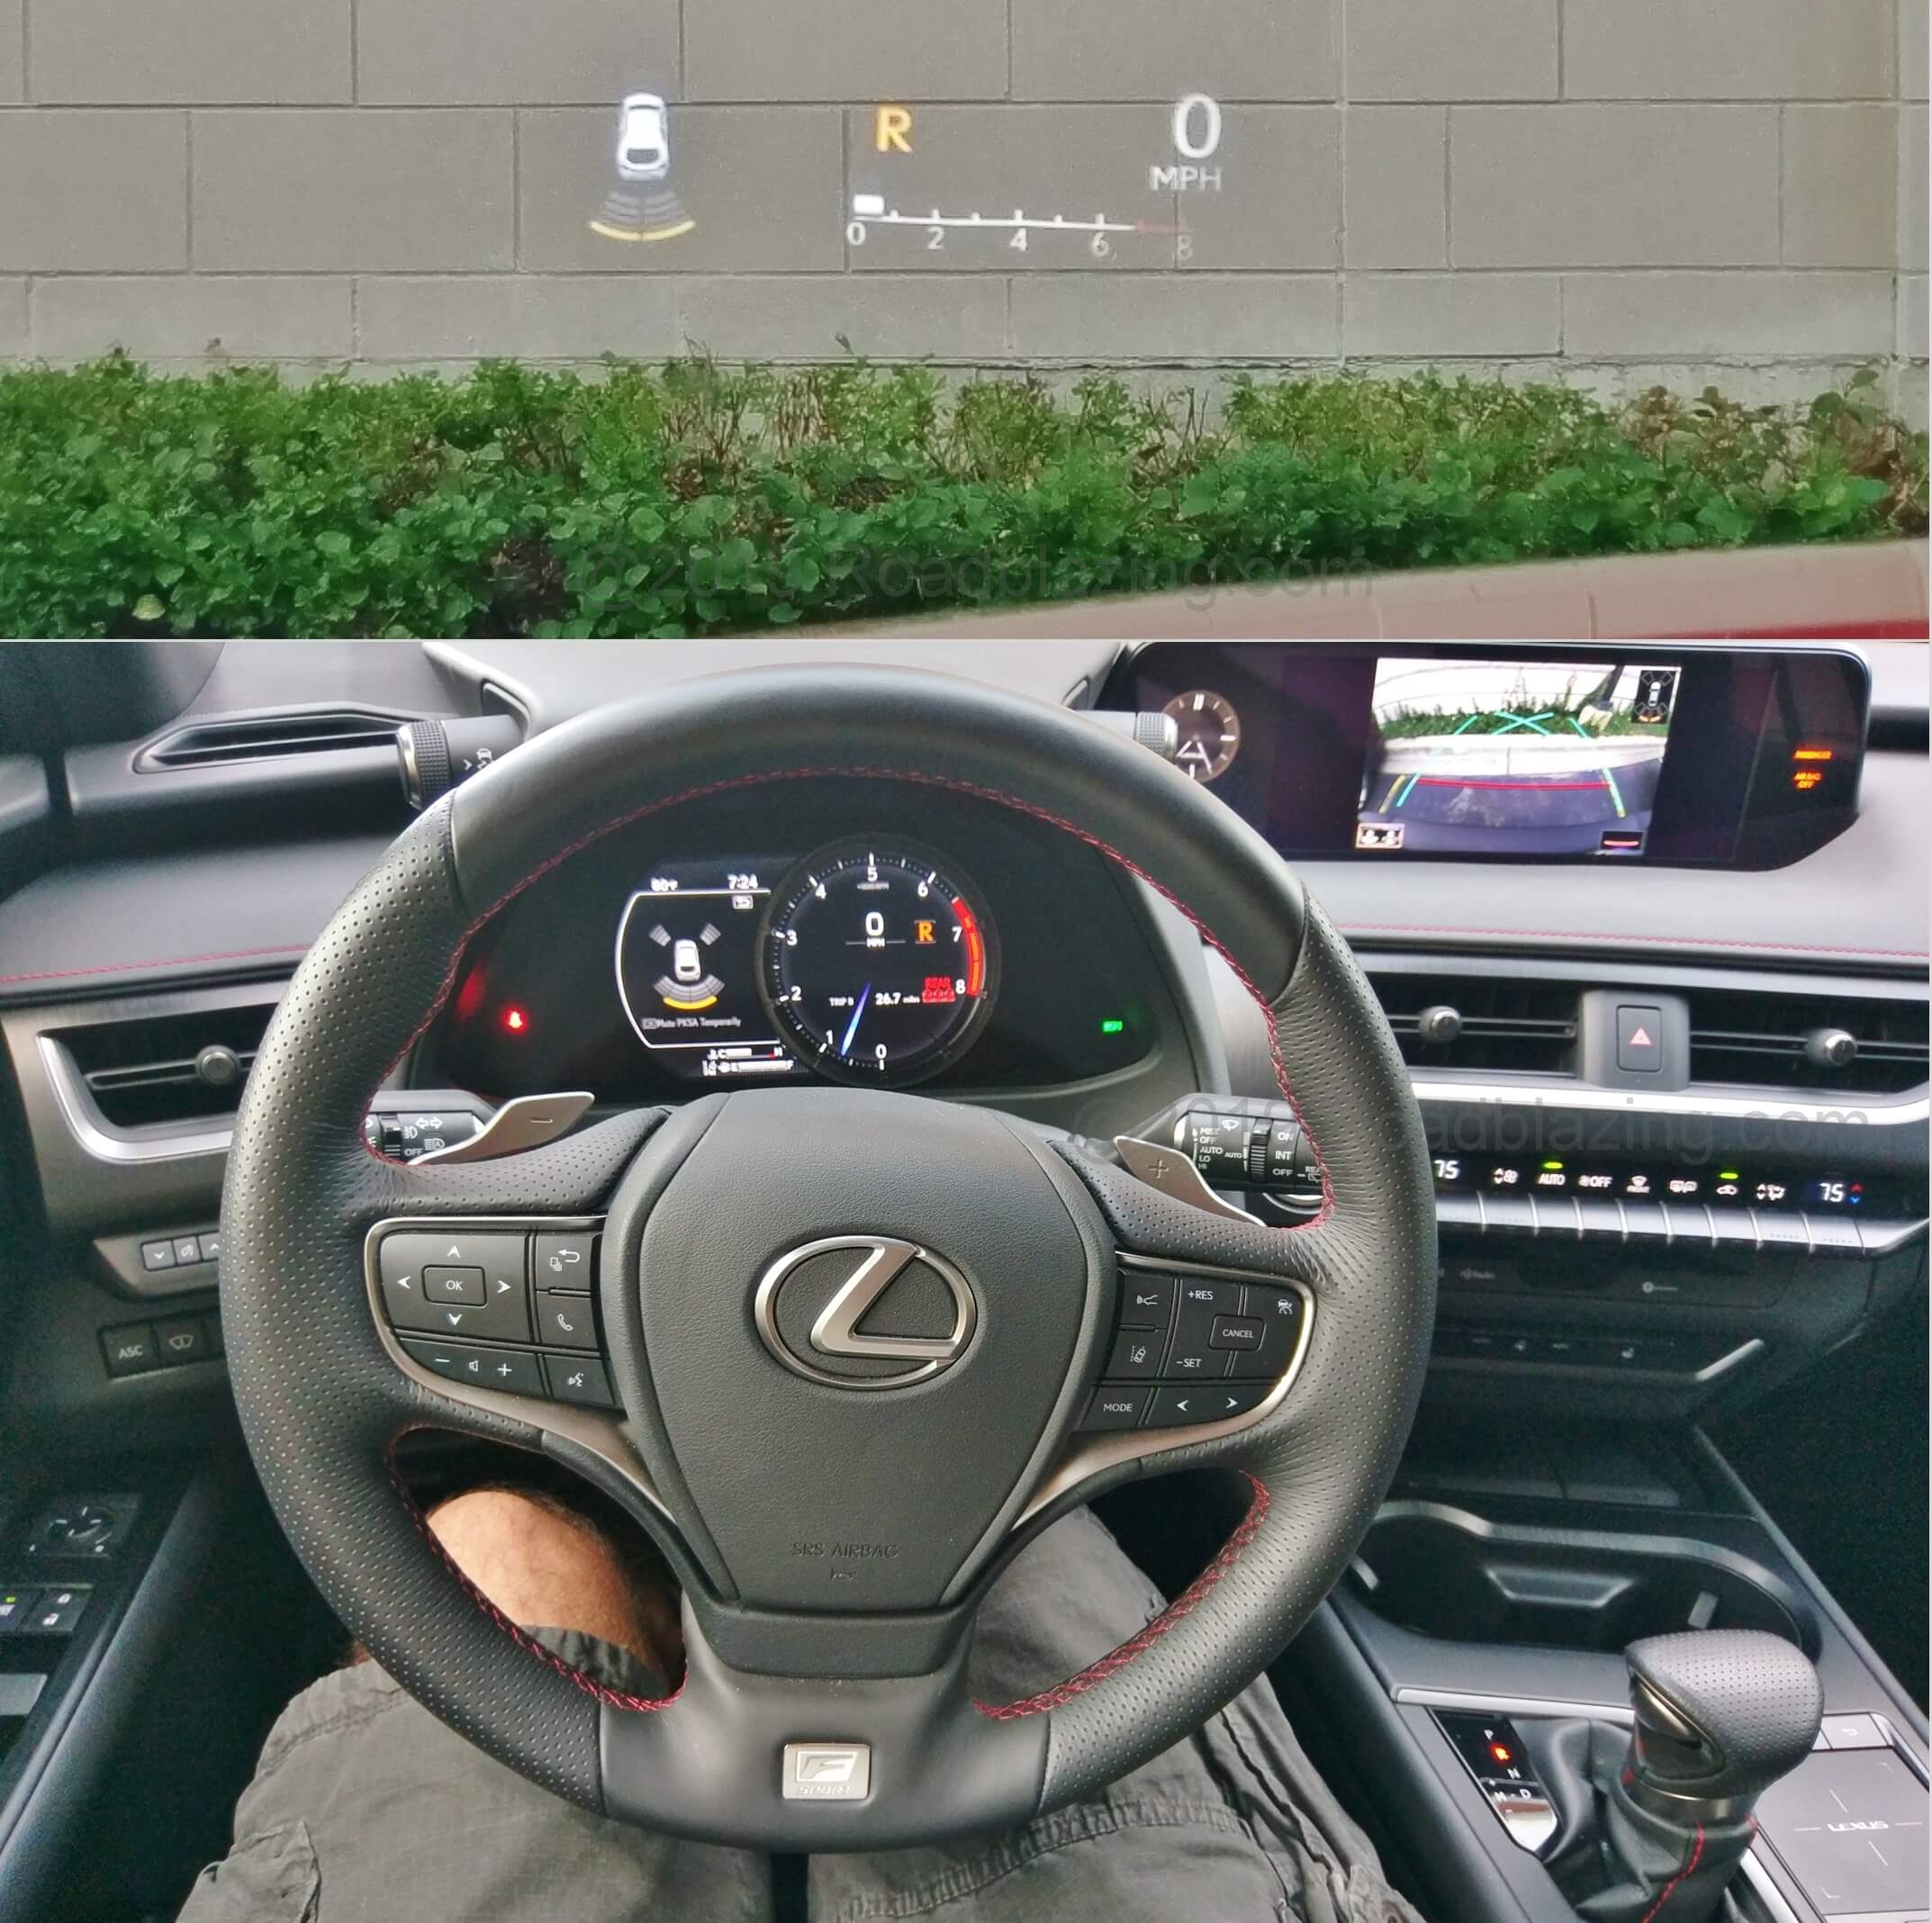 2019 Lexus UX 200 F-Sport: sonar visual and audible park proximity assist displays in HUD and 8.0" gauge cluster; Rear camera includes path grid